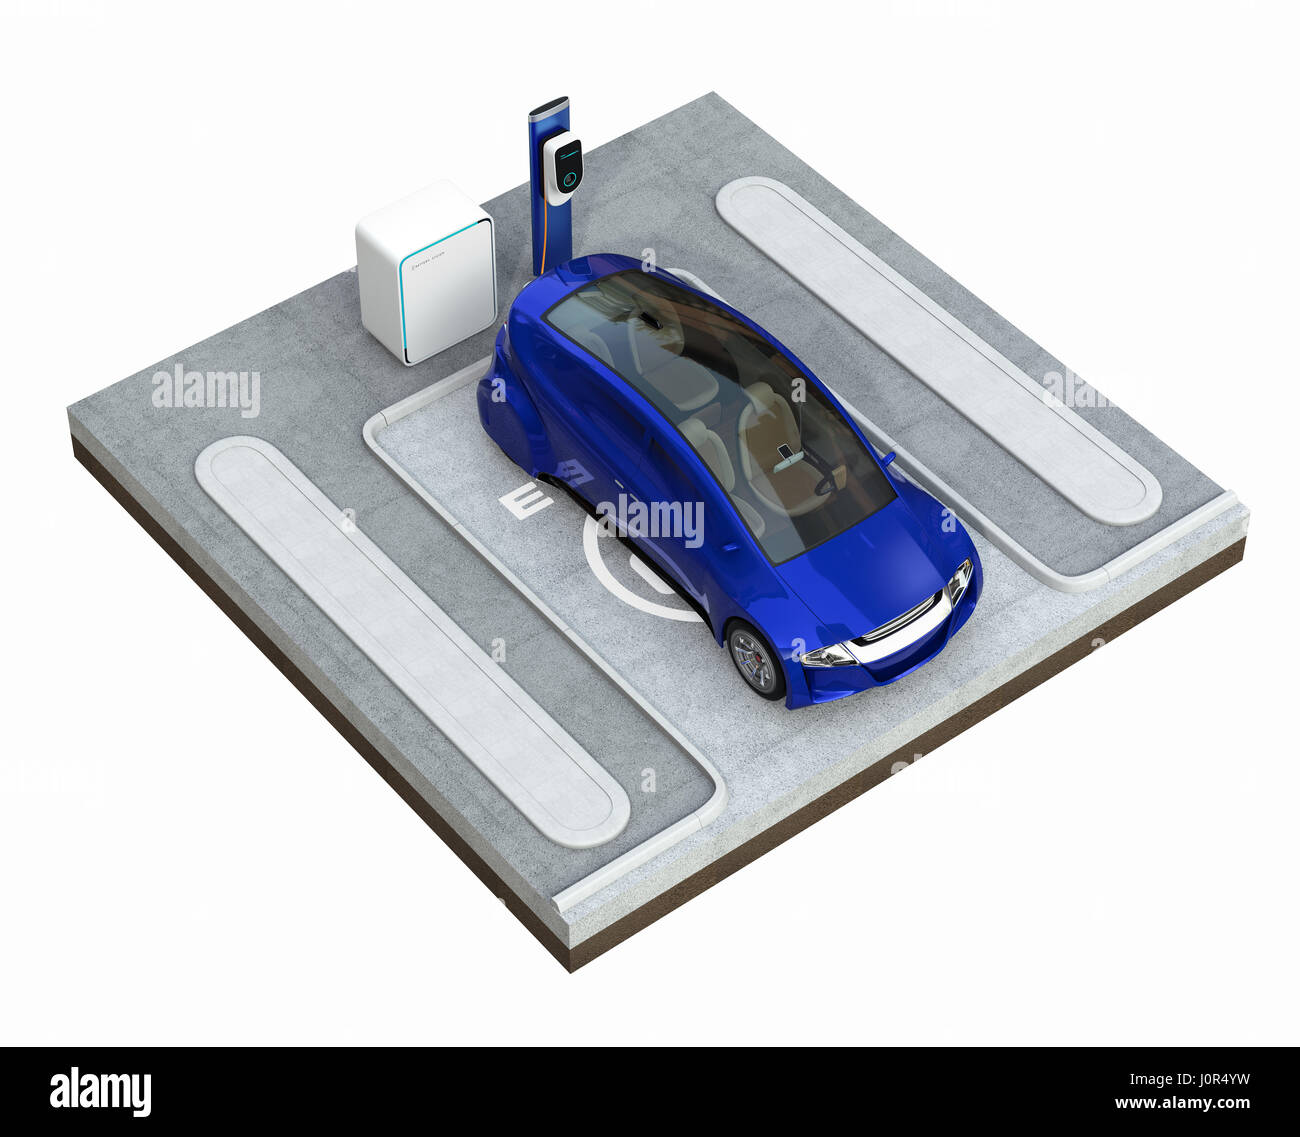 Empty electric vehicle parking lot equip with charging station. 3D rendering image. Stock Photo